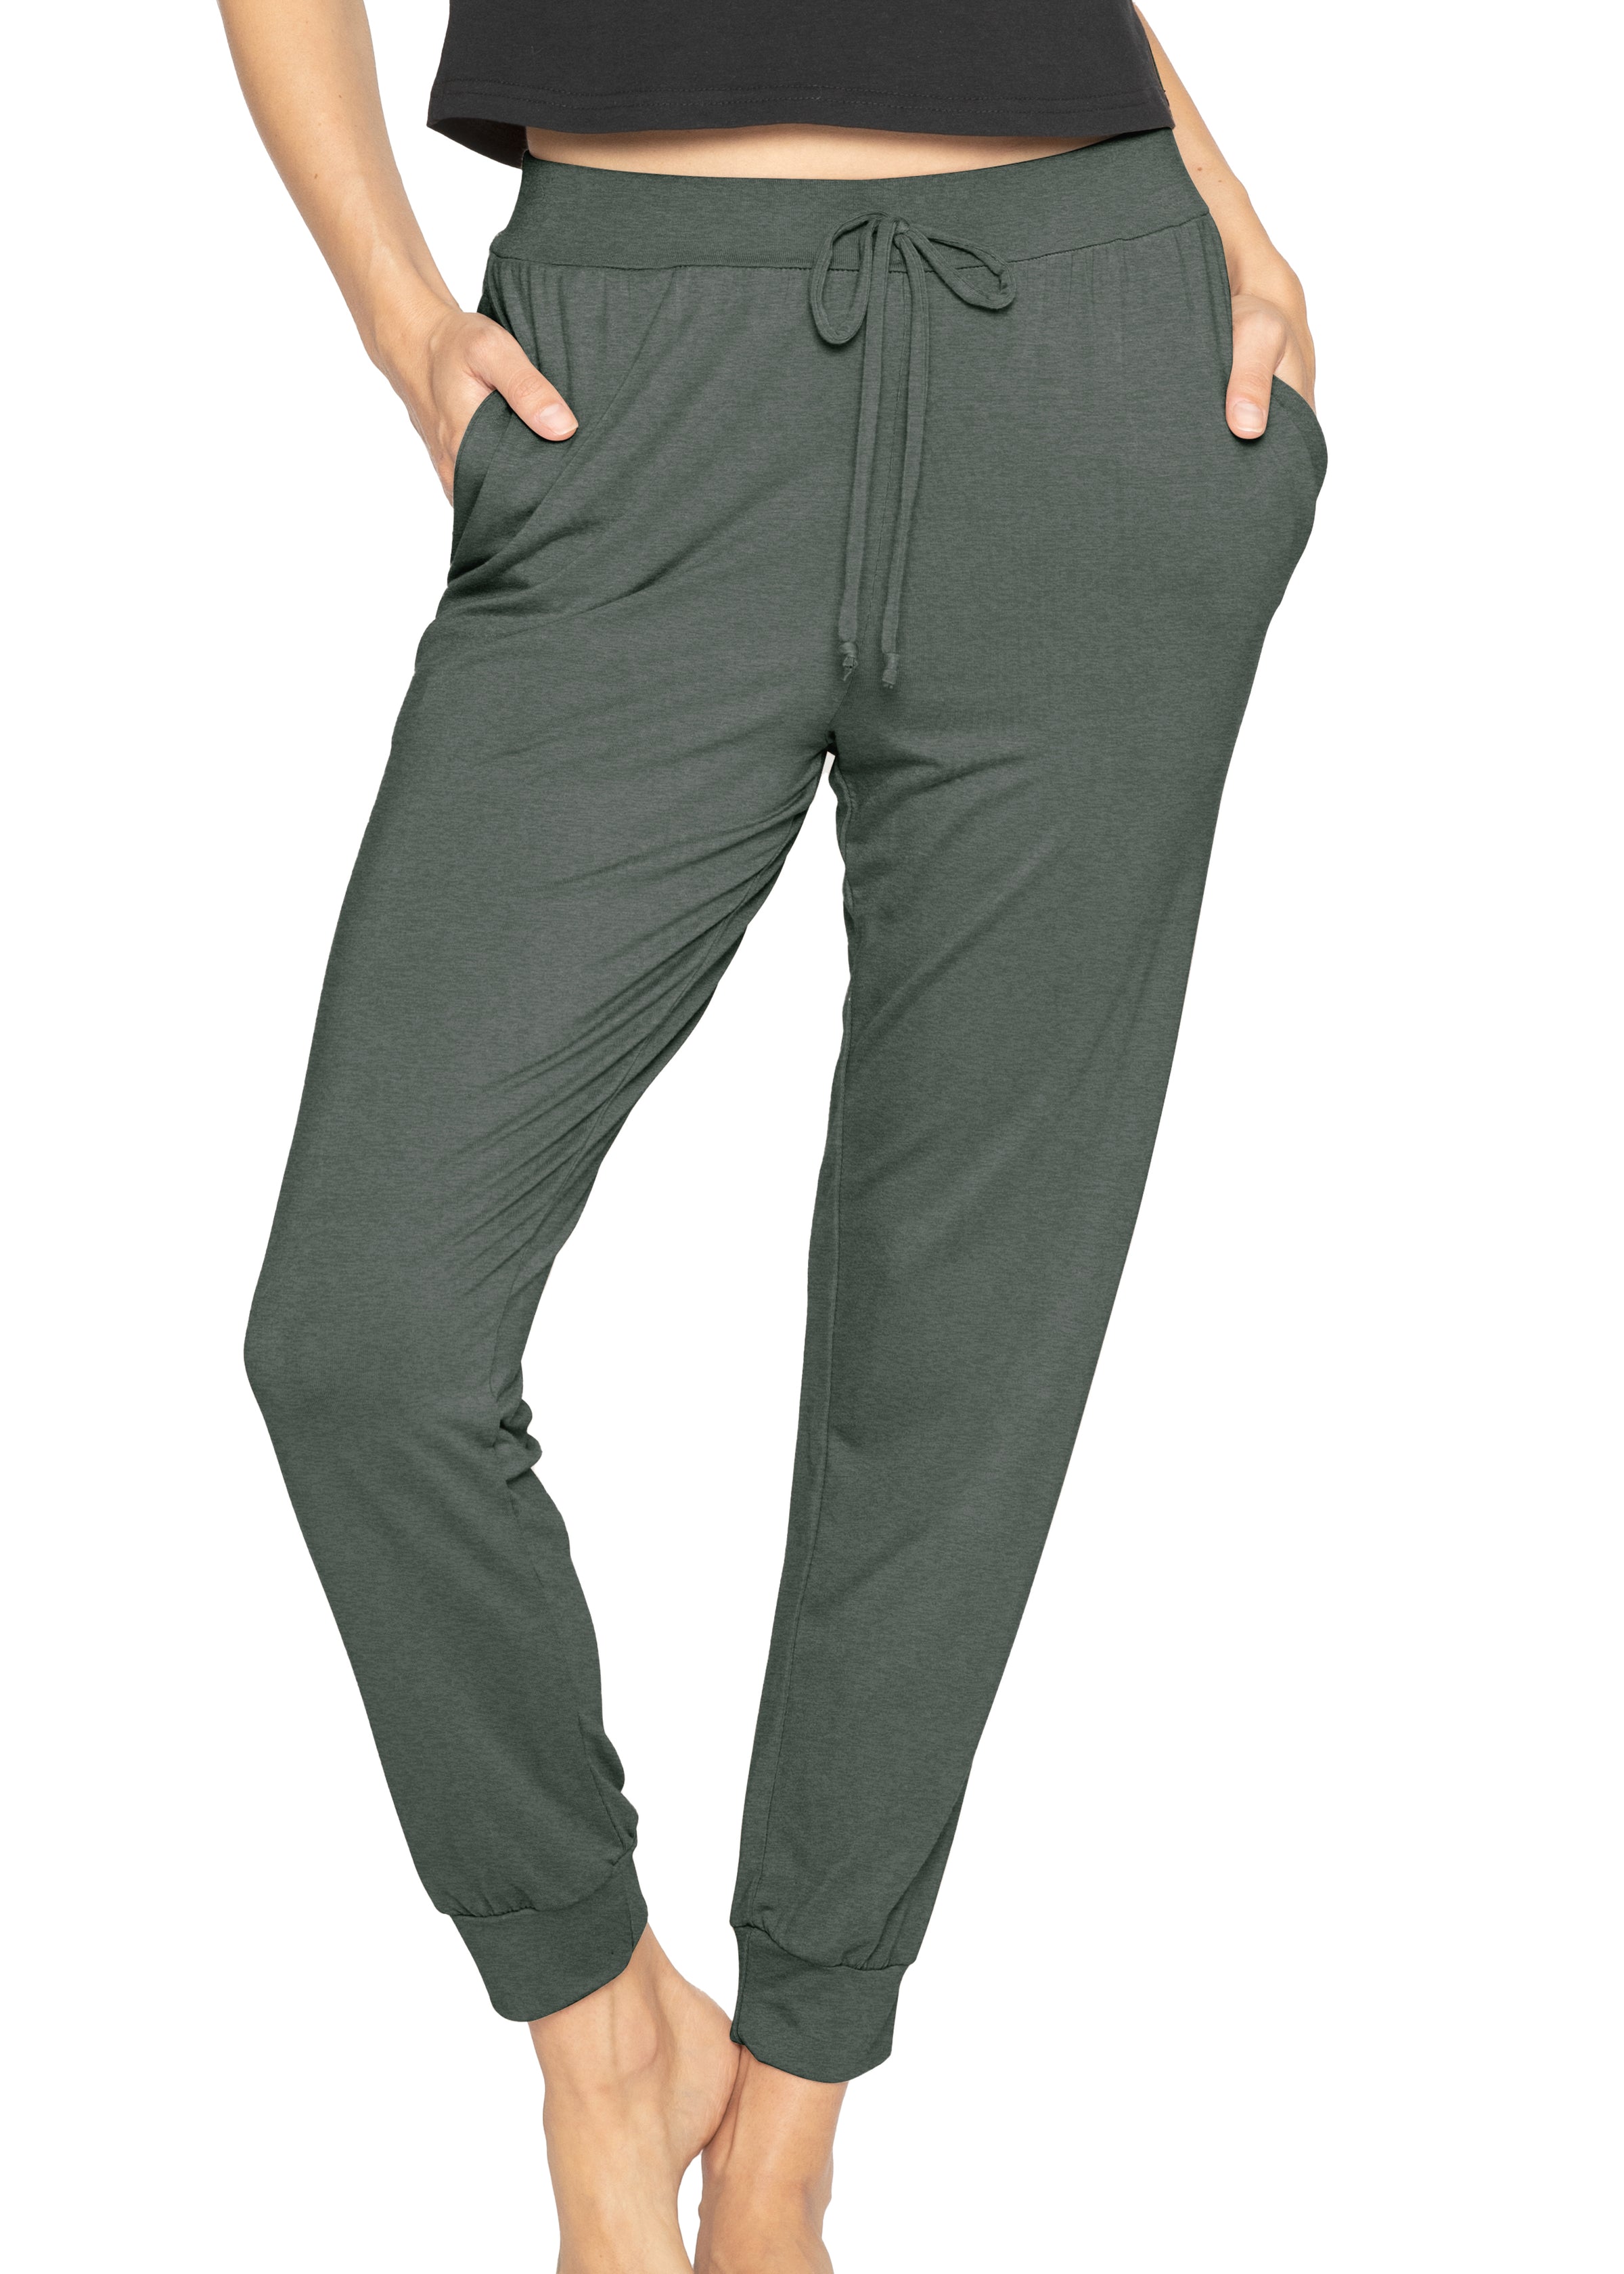 Up To 69% Off on Women's Jogger Pants w/ Pockets